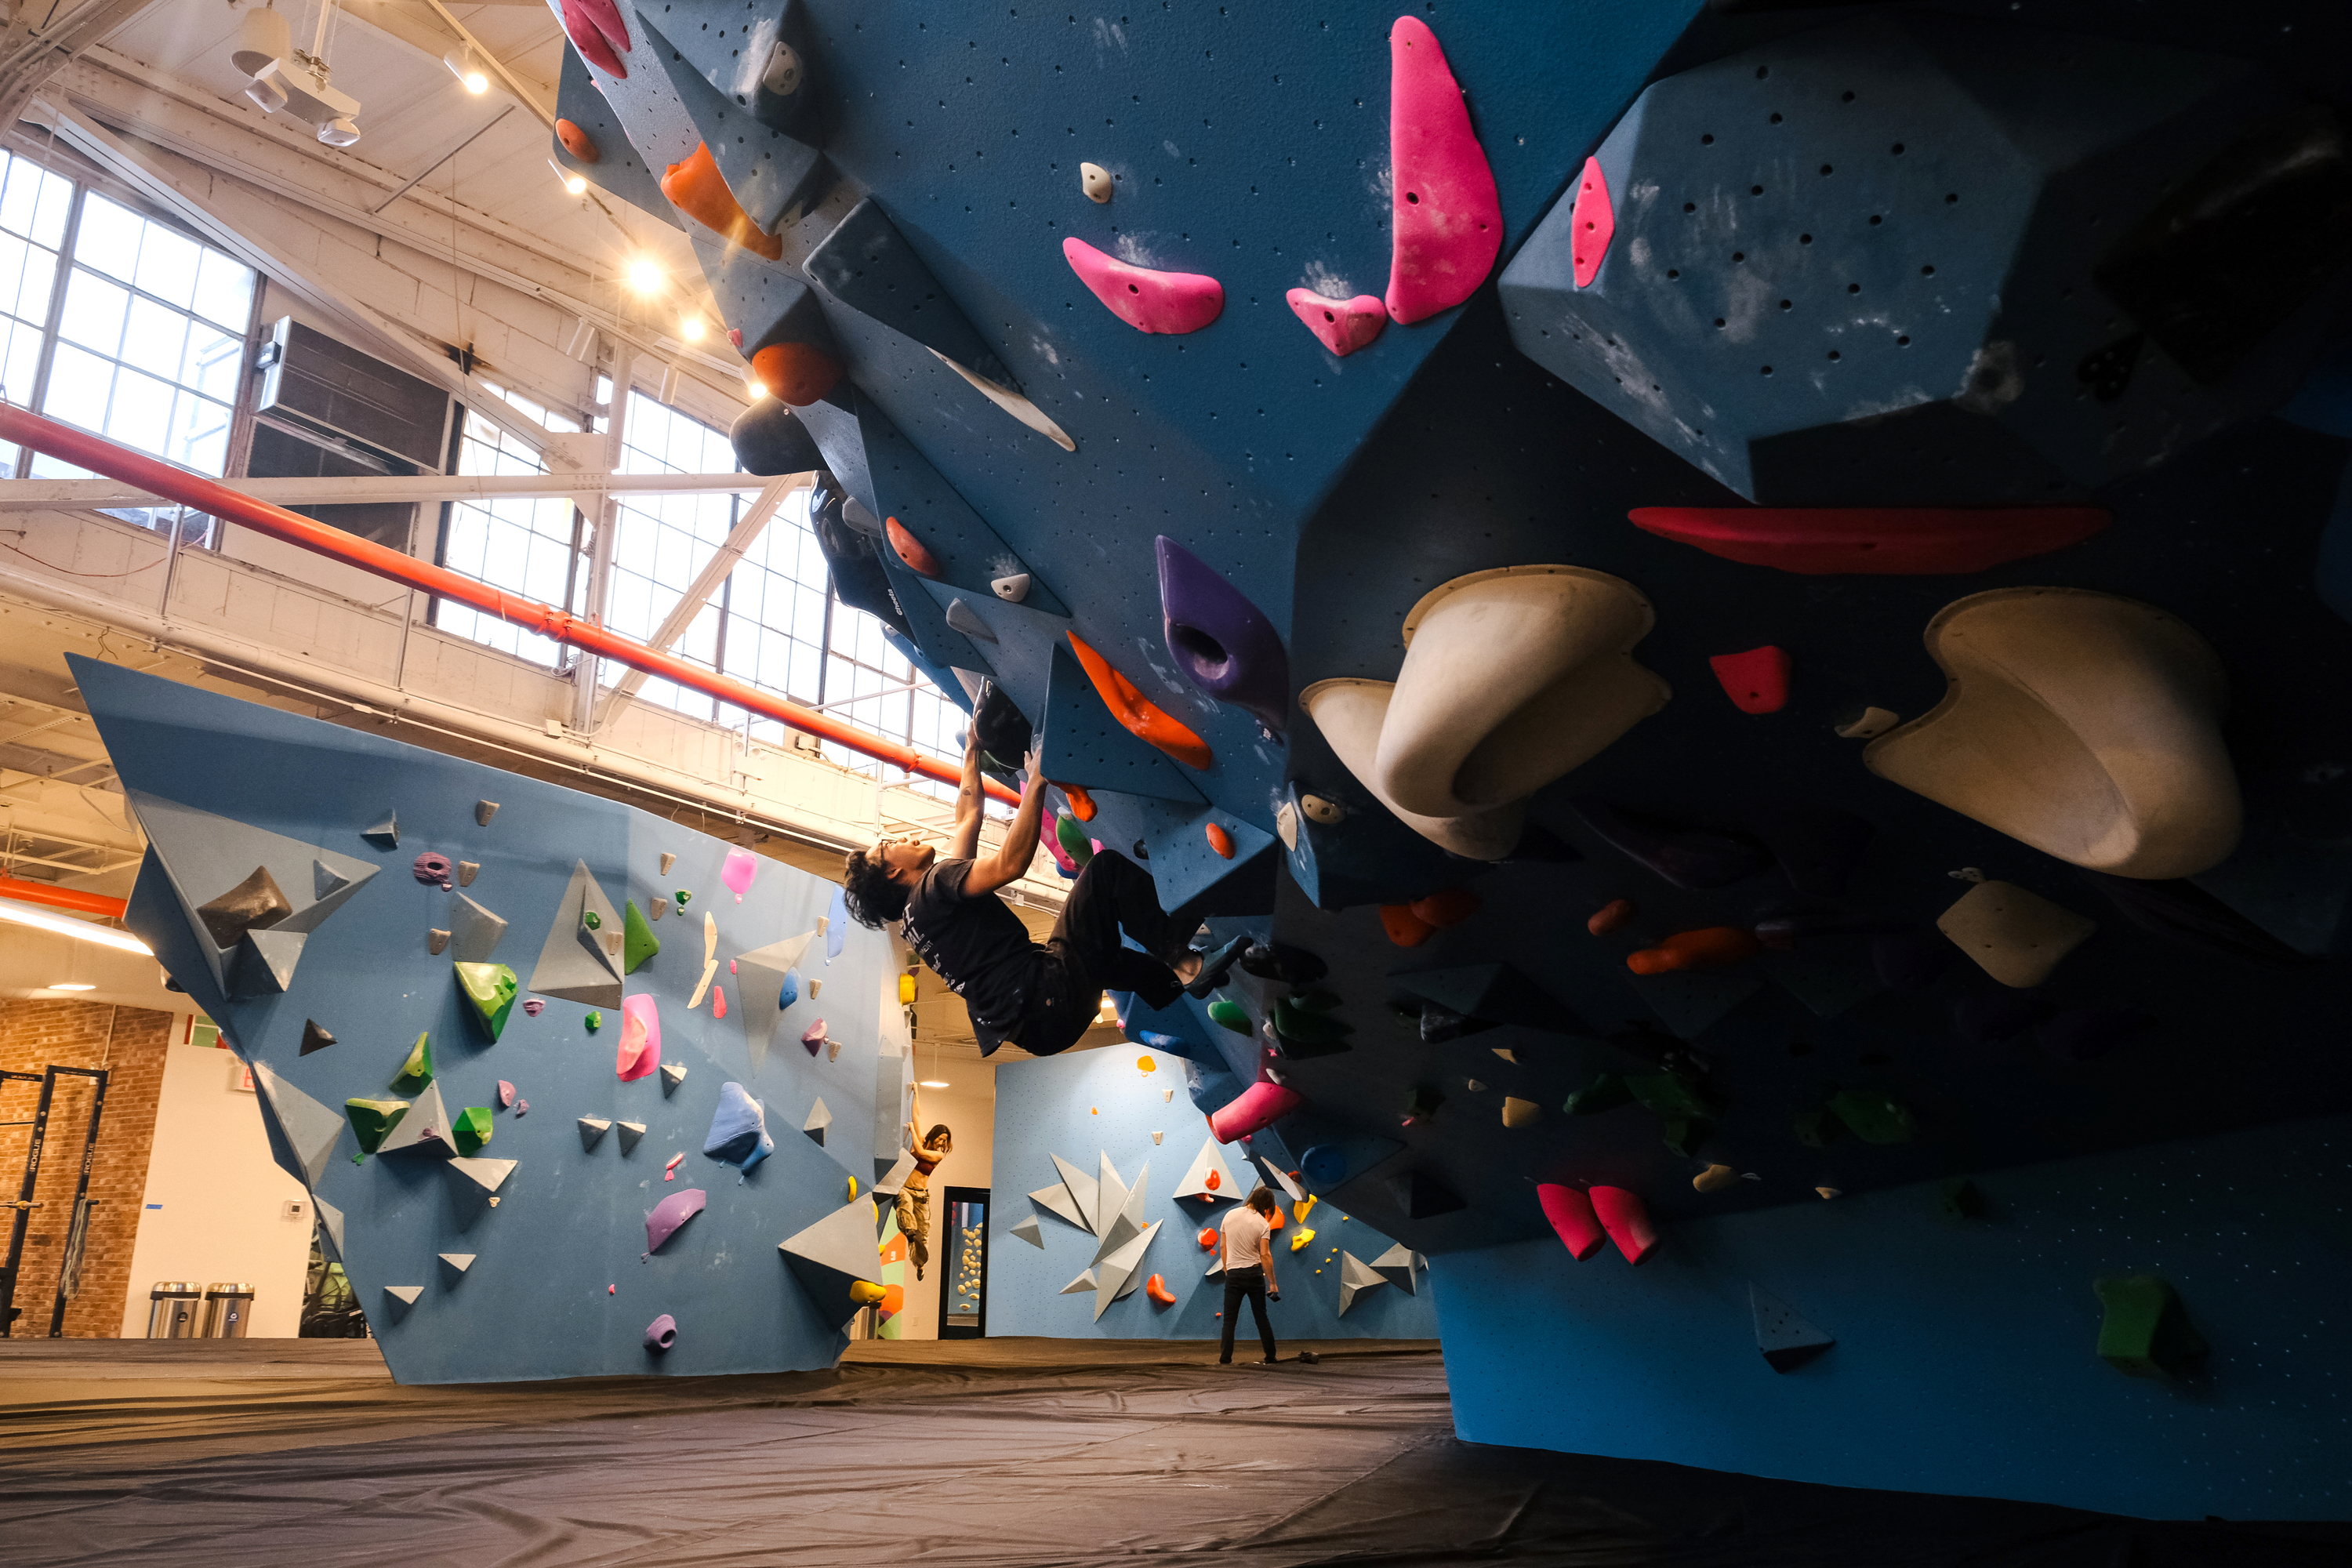 The former Brooklyn Boulders just reopened as Bouldering Project Brooklyn